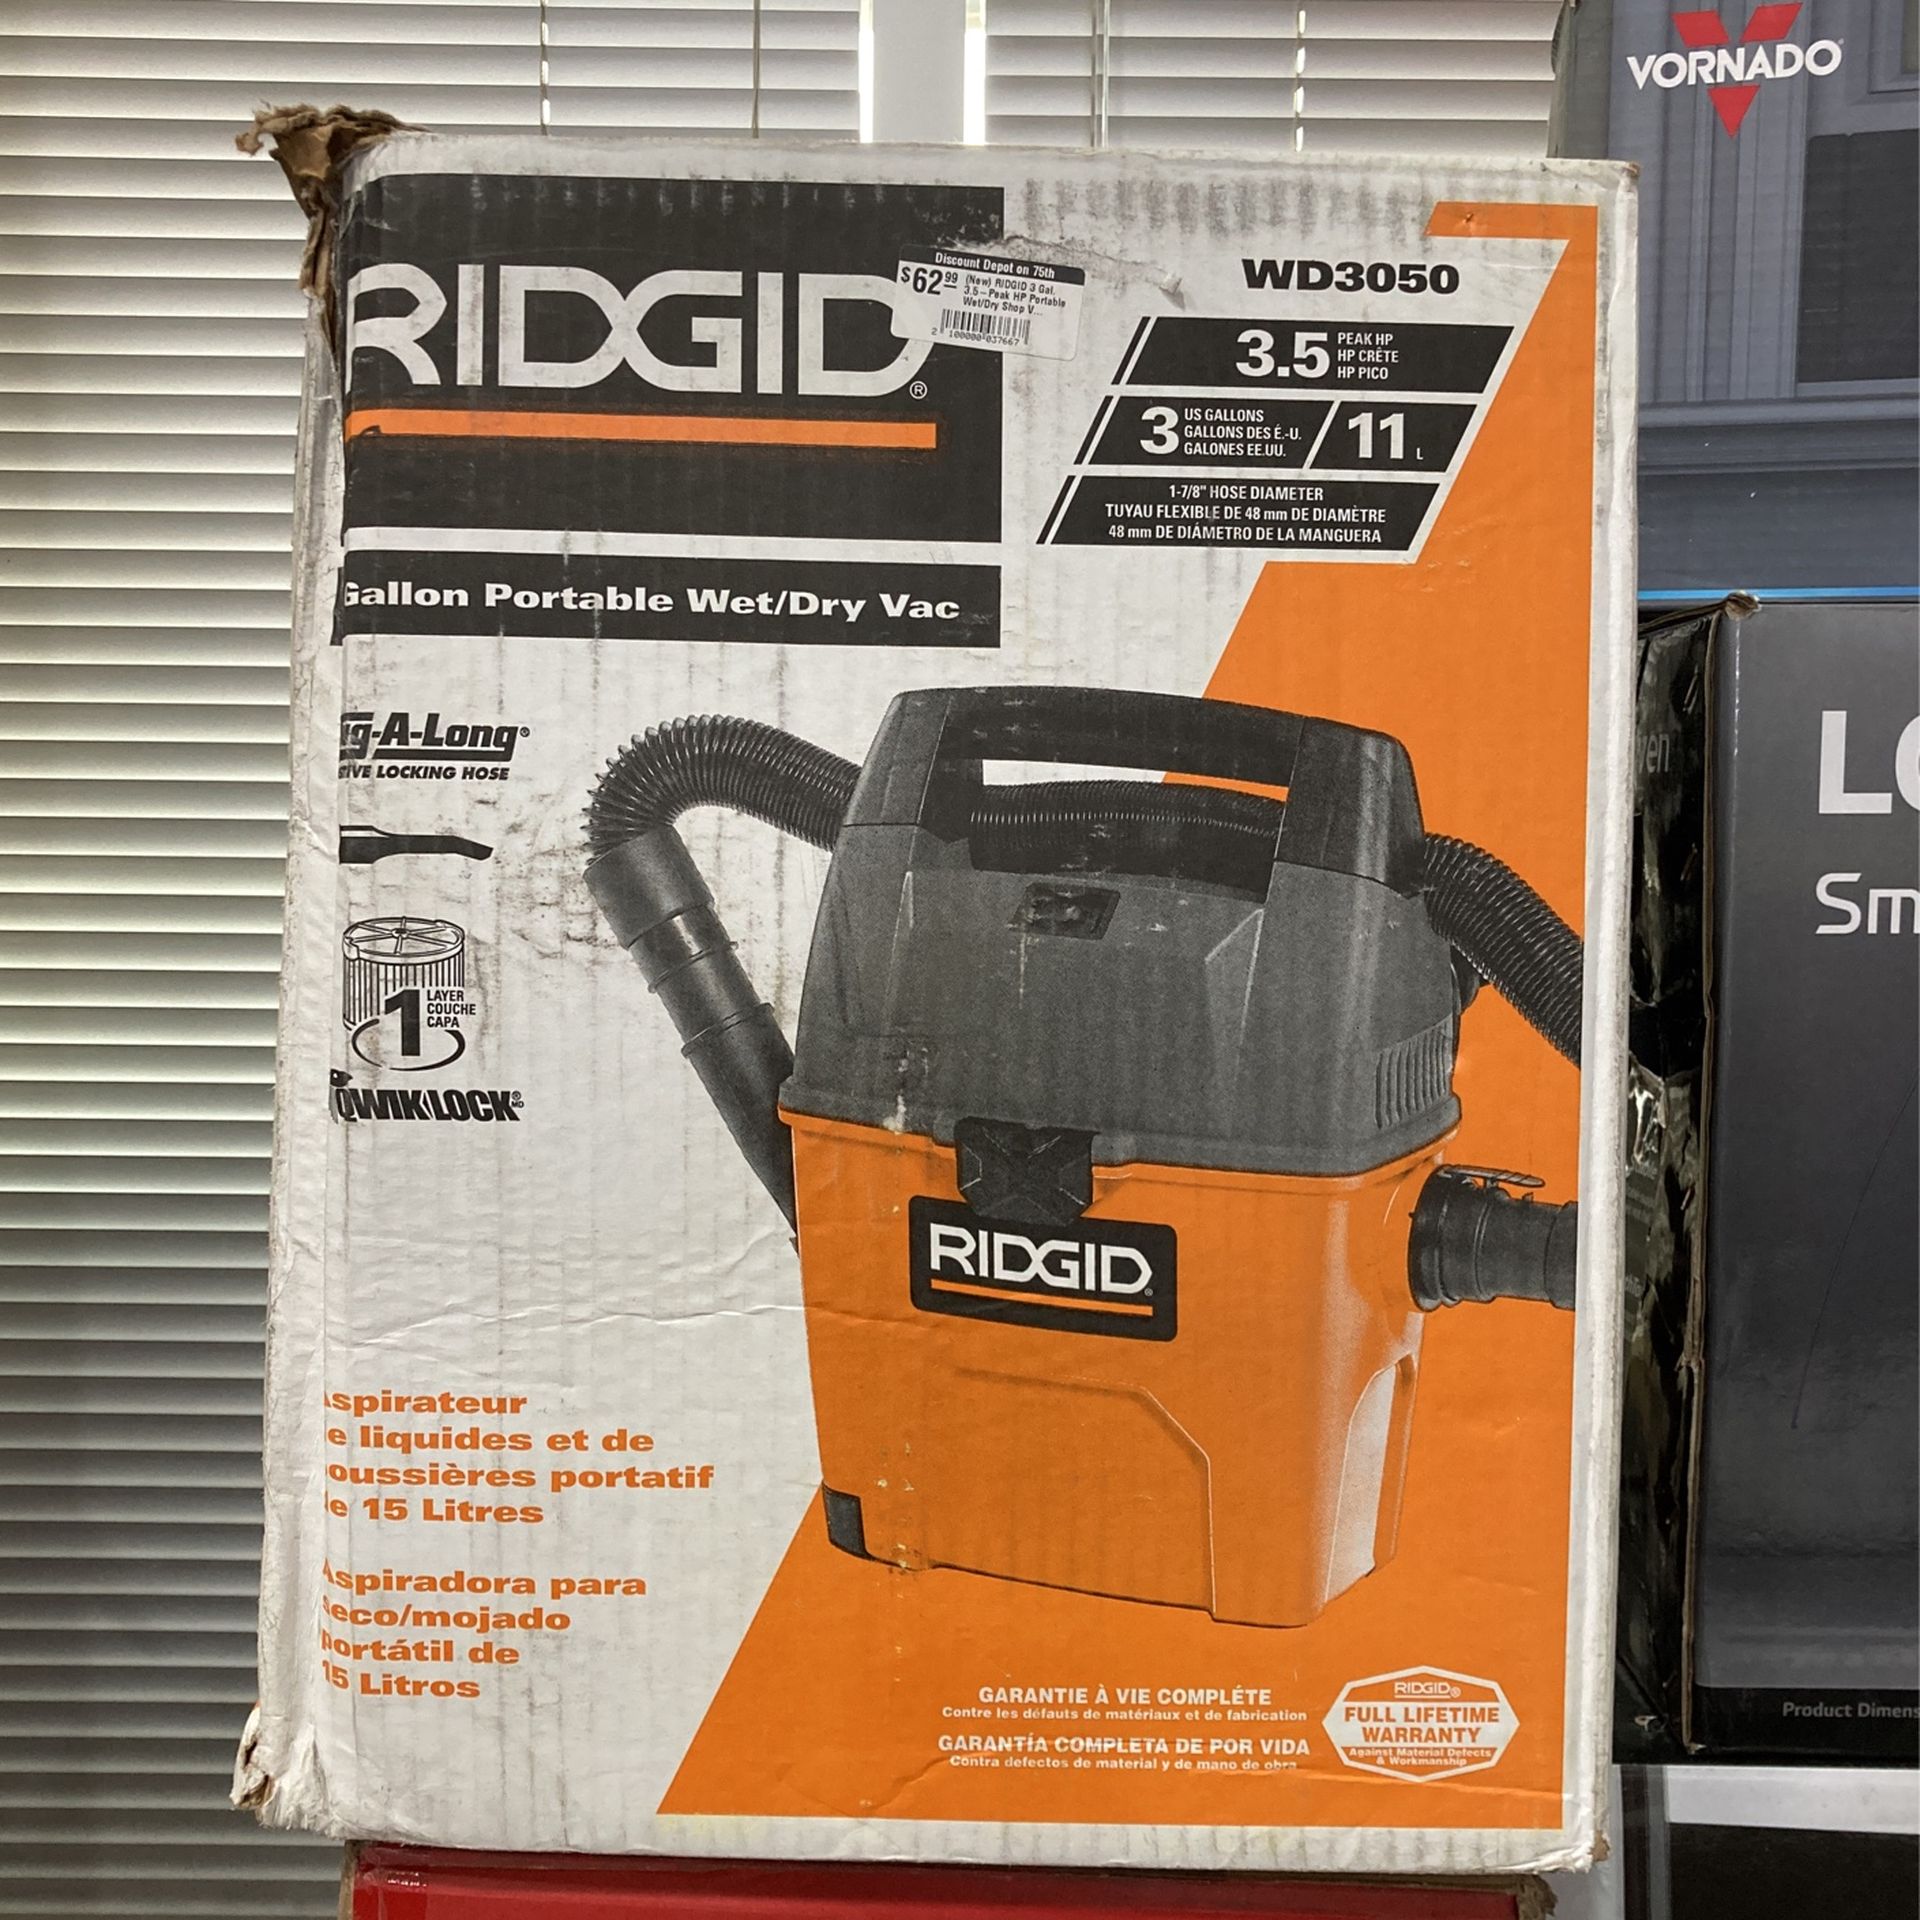 RIDGID 3 Gallon 3.5 Peak HP Portable Wet/Dry Shop Vacuum with Built in Dust Pan, Filter, Expandable Locking Hose and Car Nozzle